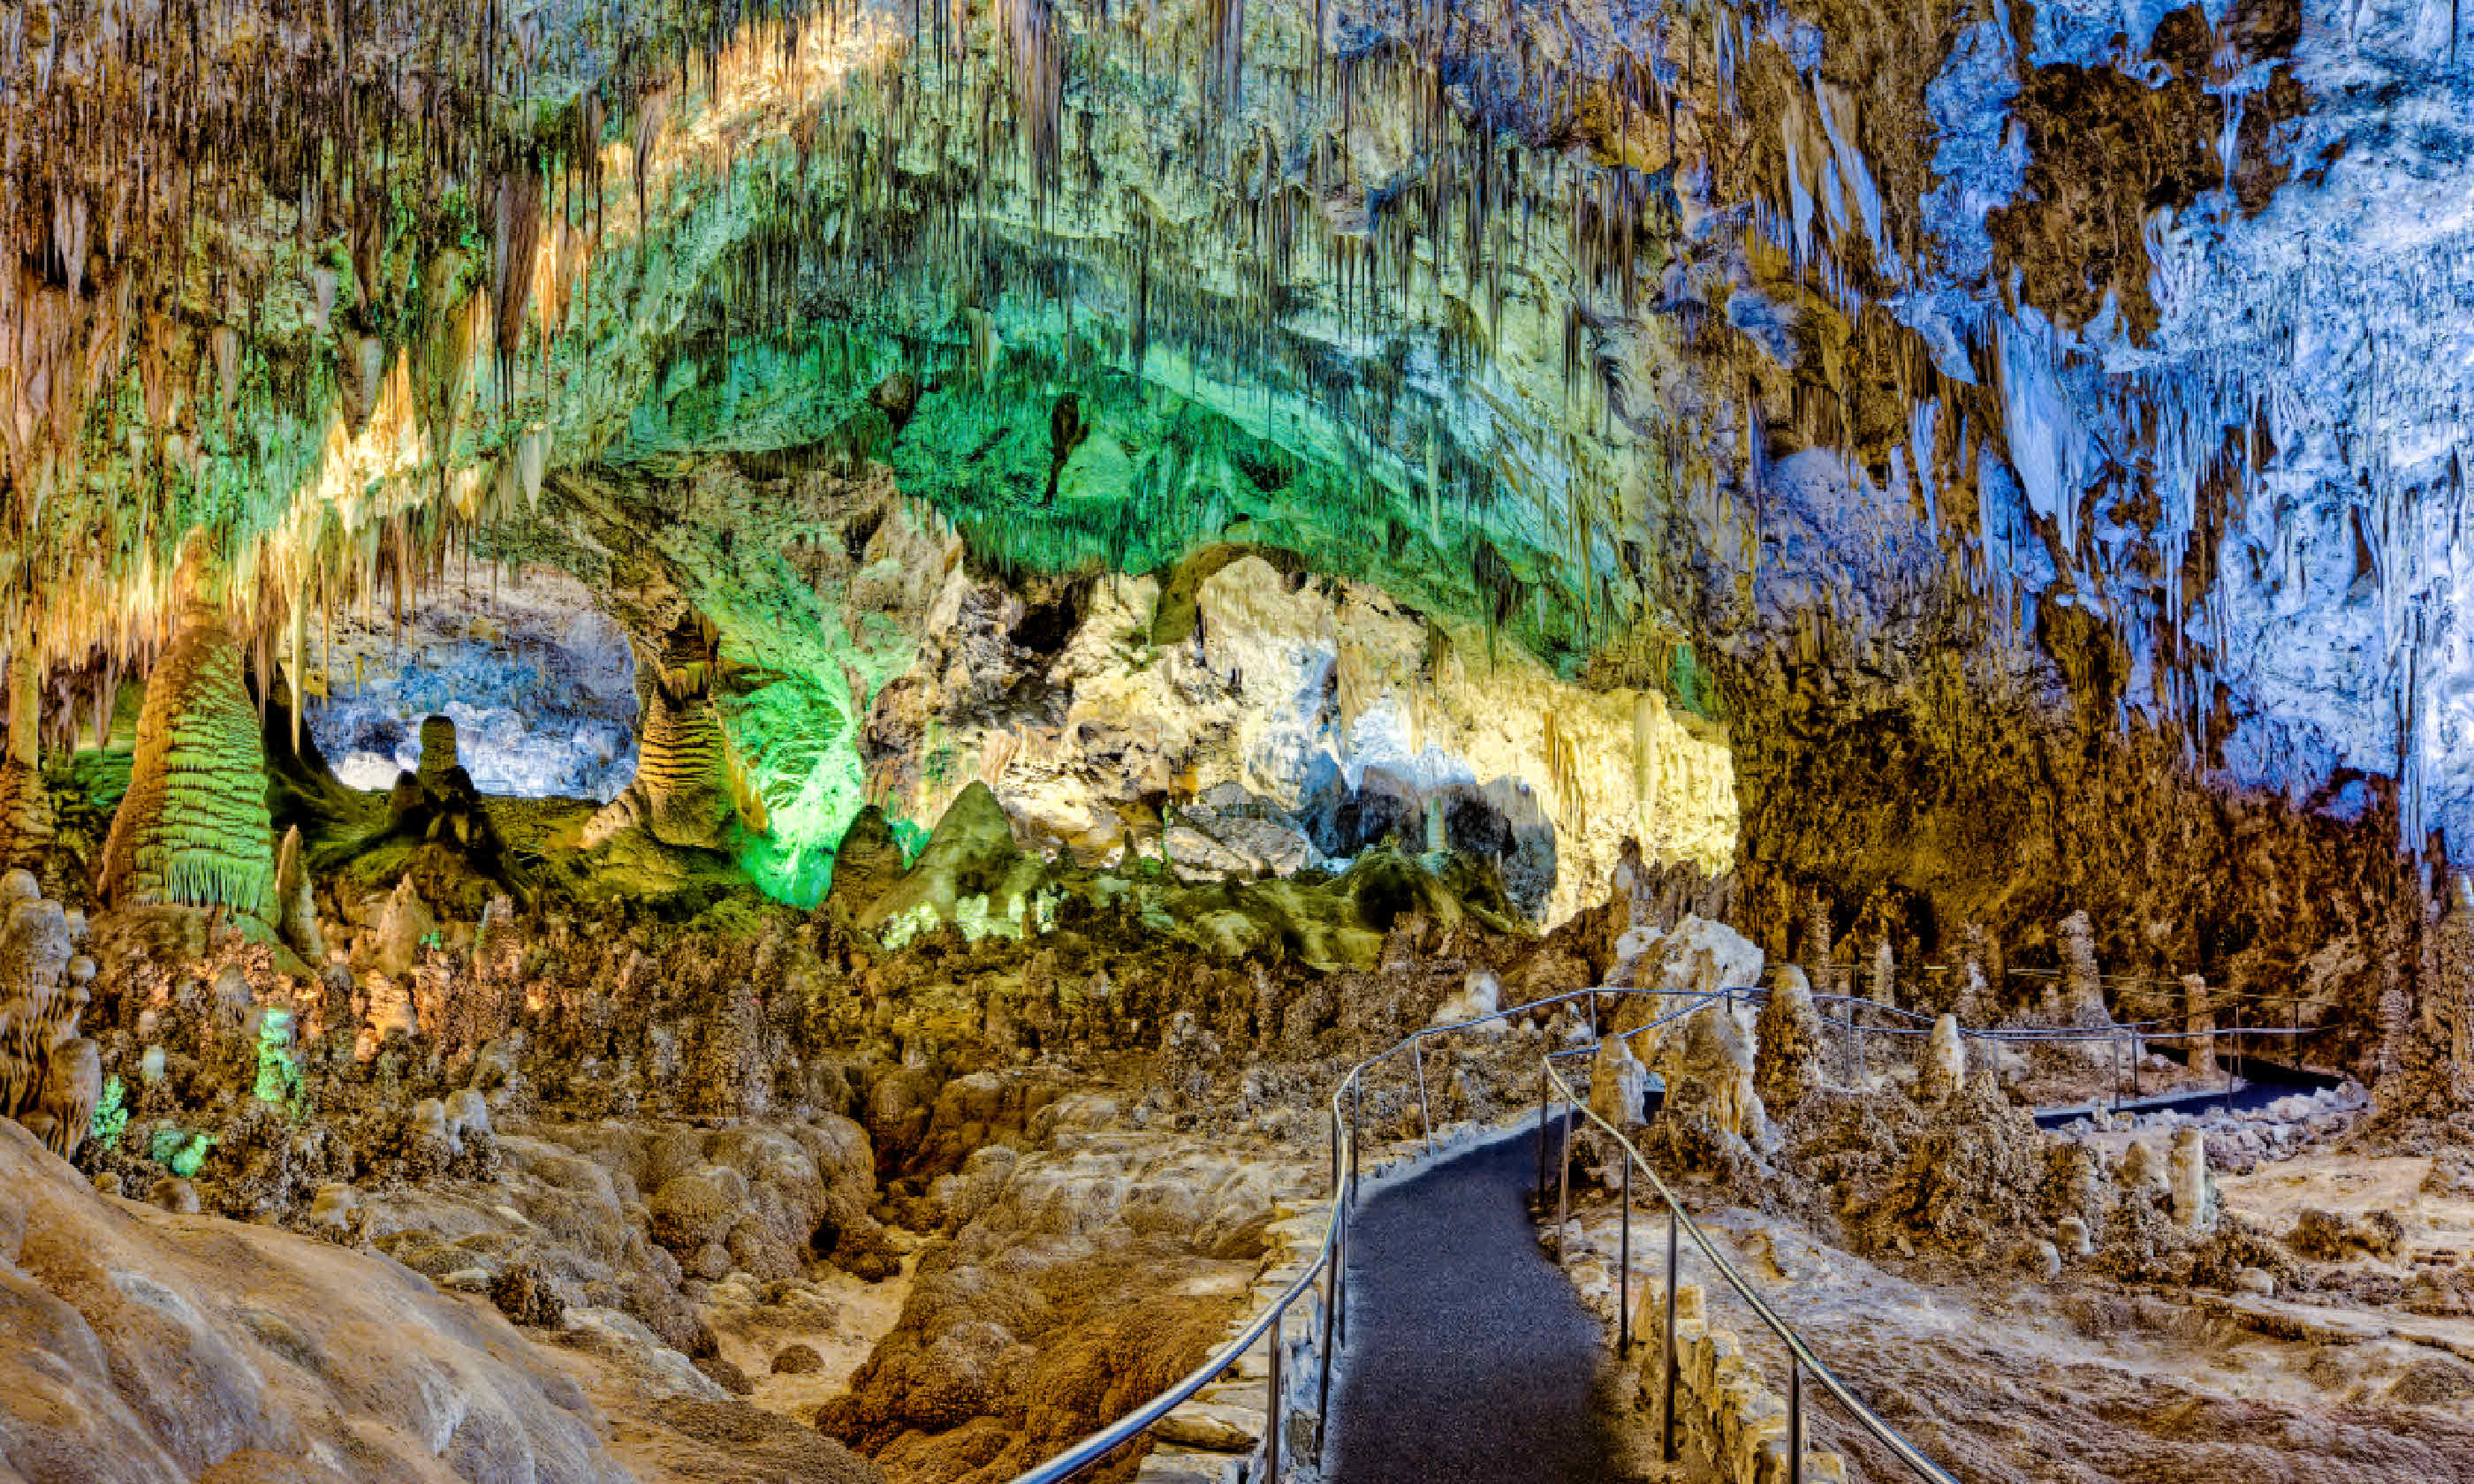 Carlsbad Caverns, New Mexico (Shutterstock)